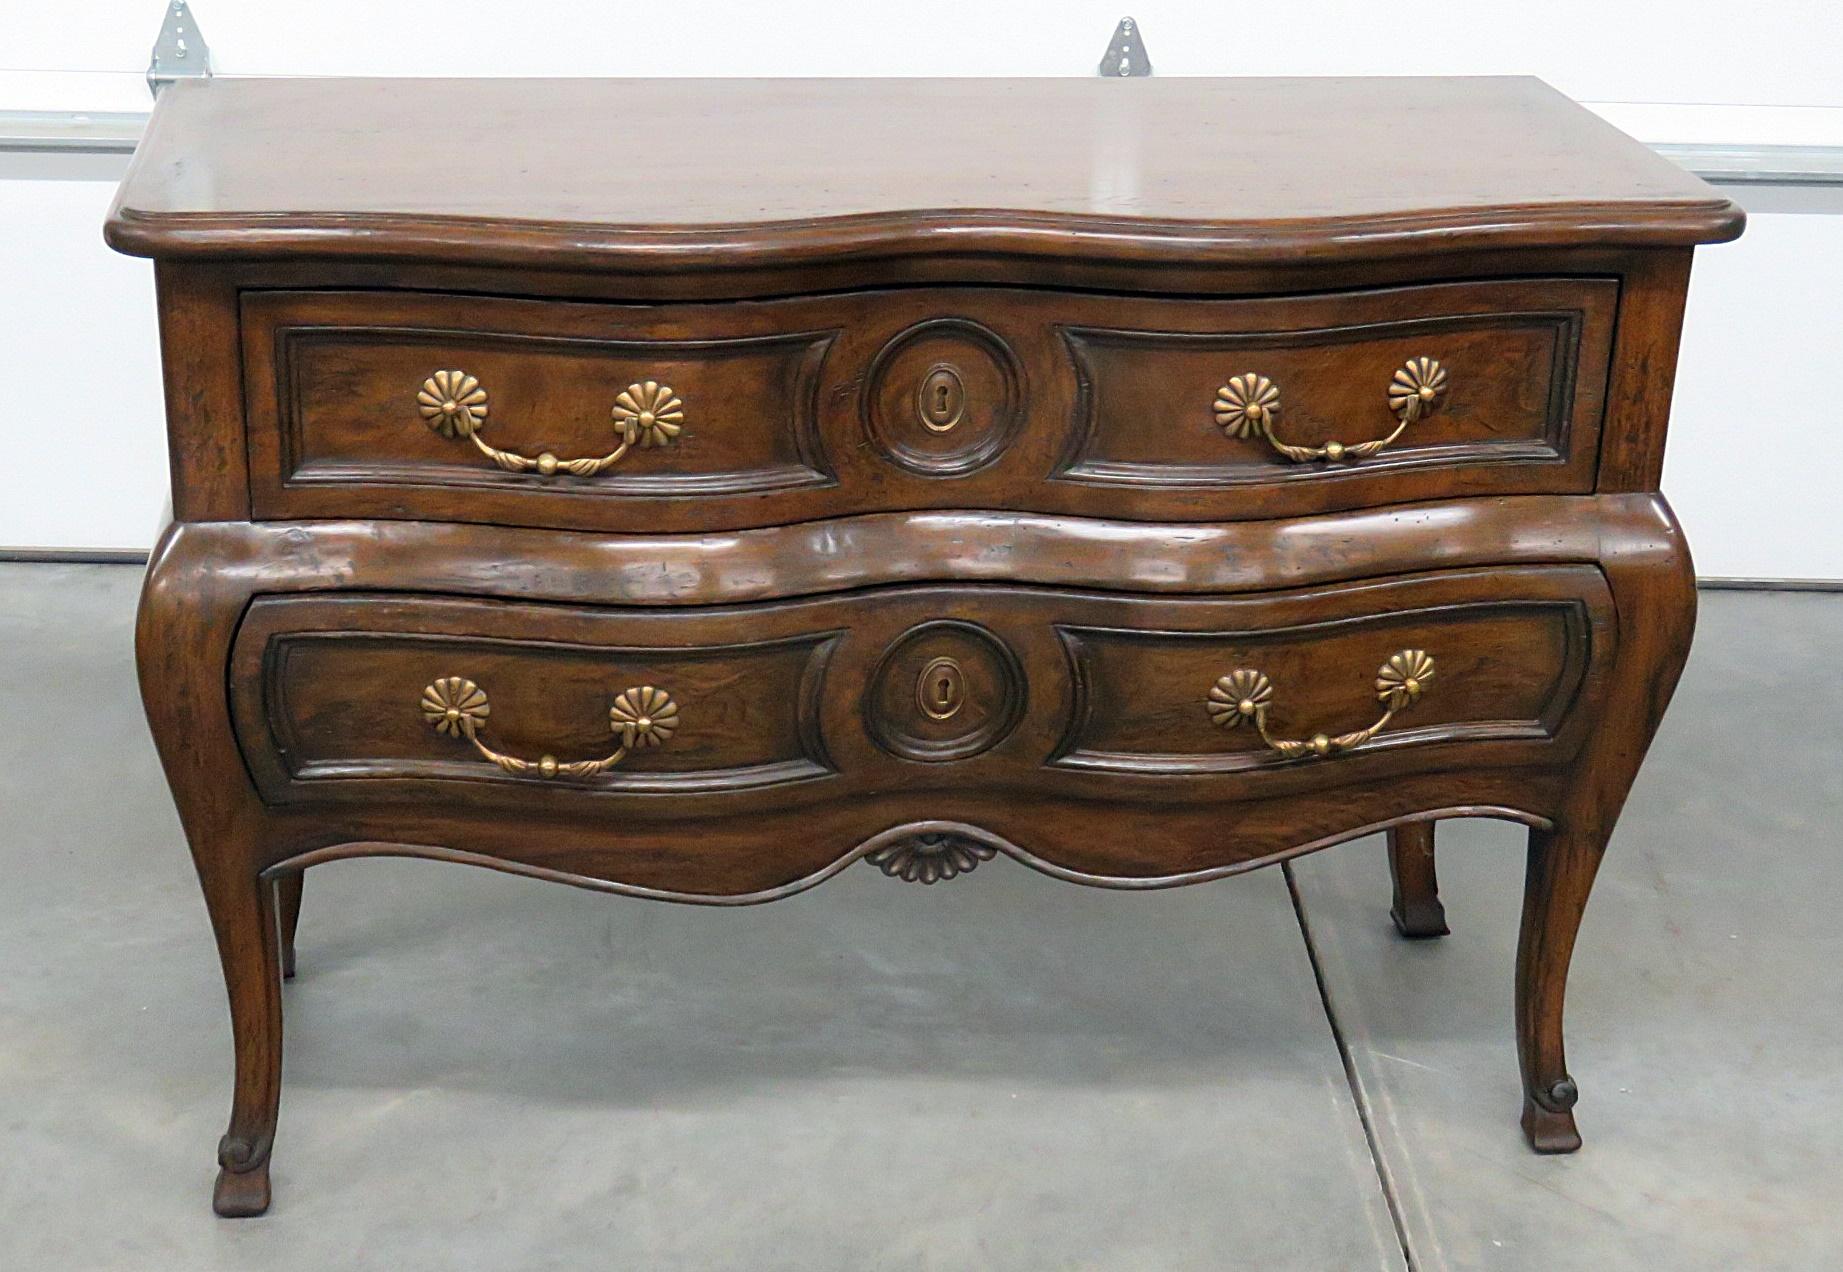 Pair of Auffray 2-drawer bombe commodes.